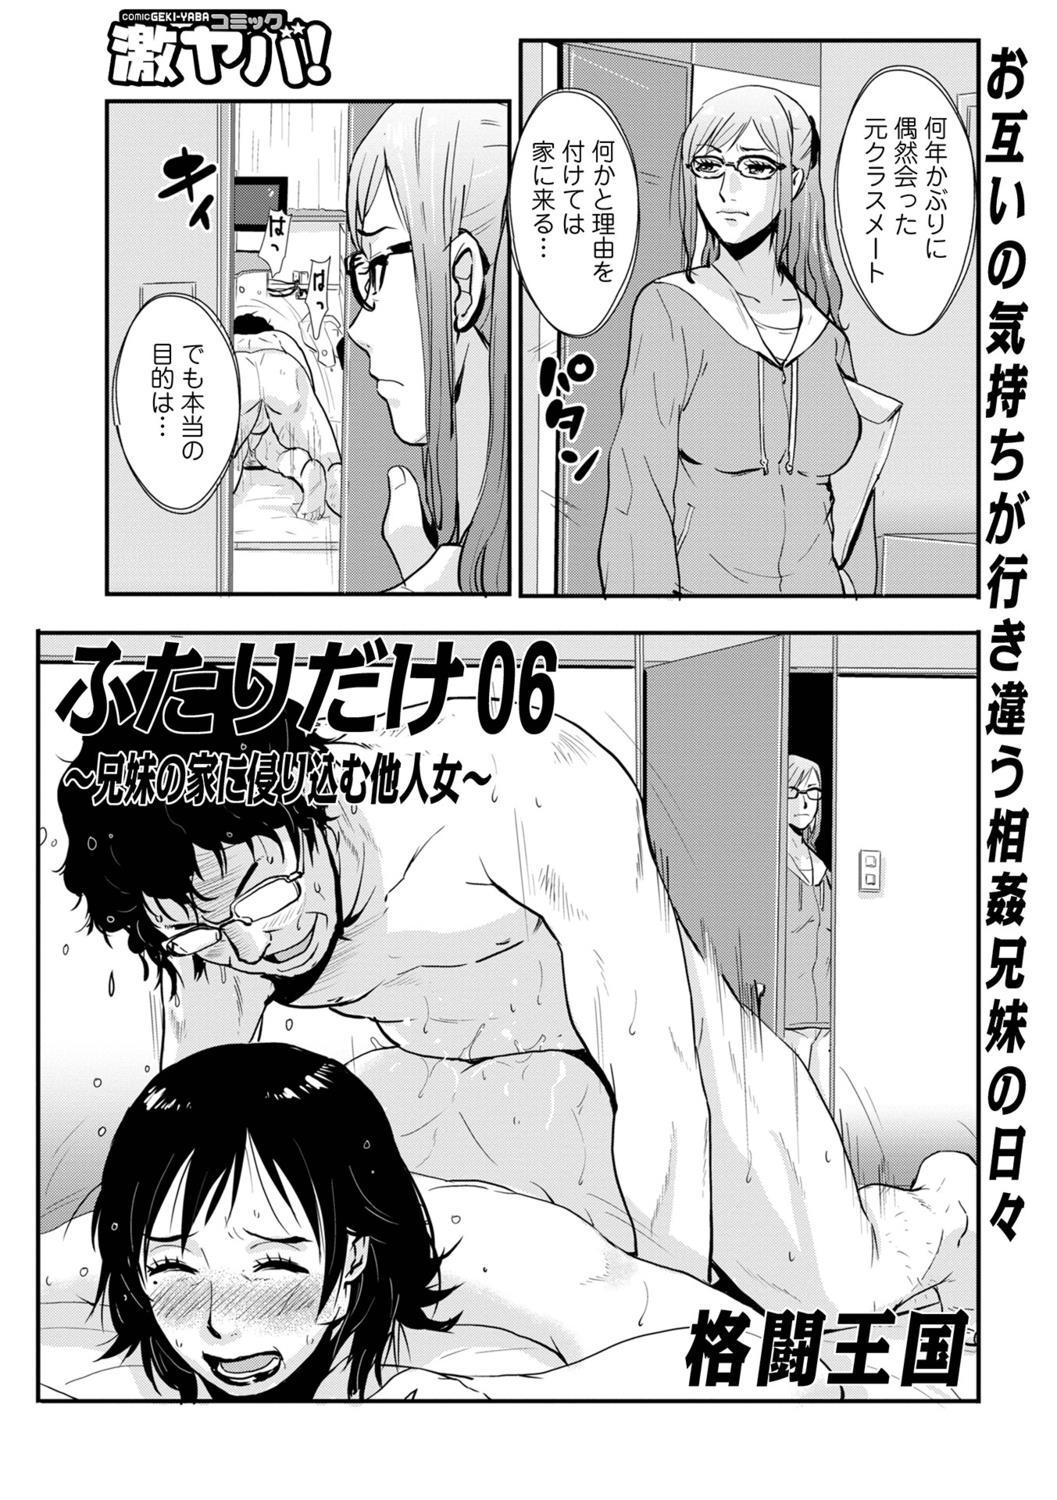 Incest brother and sister Vol.1 91